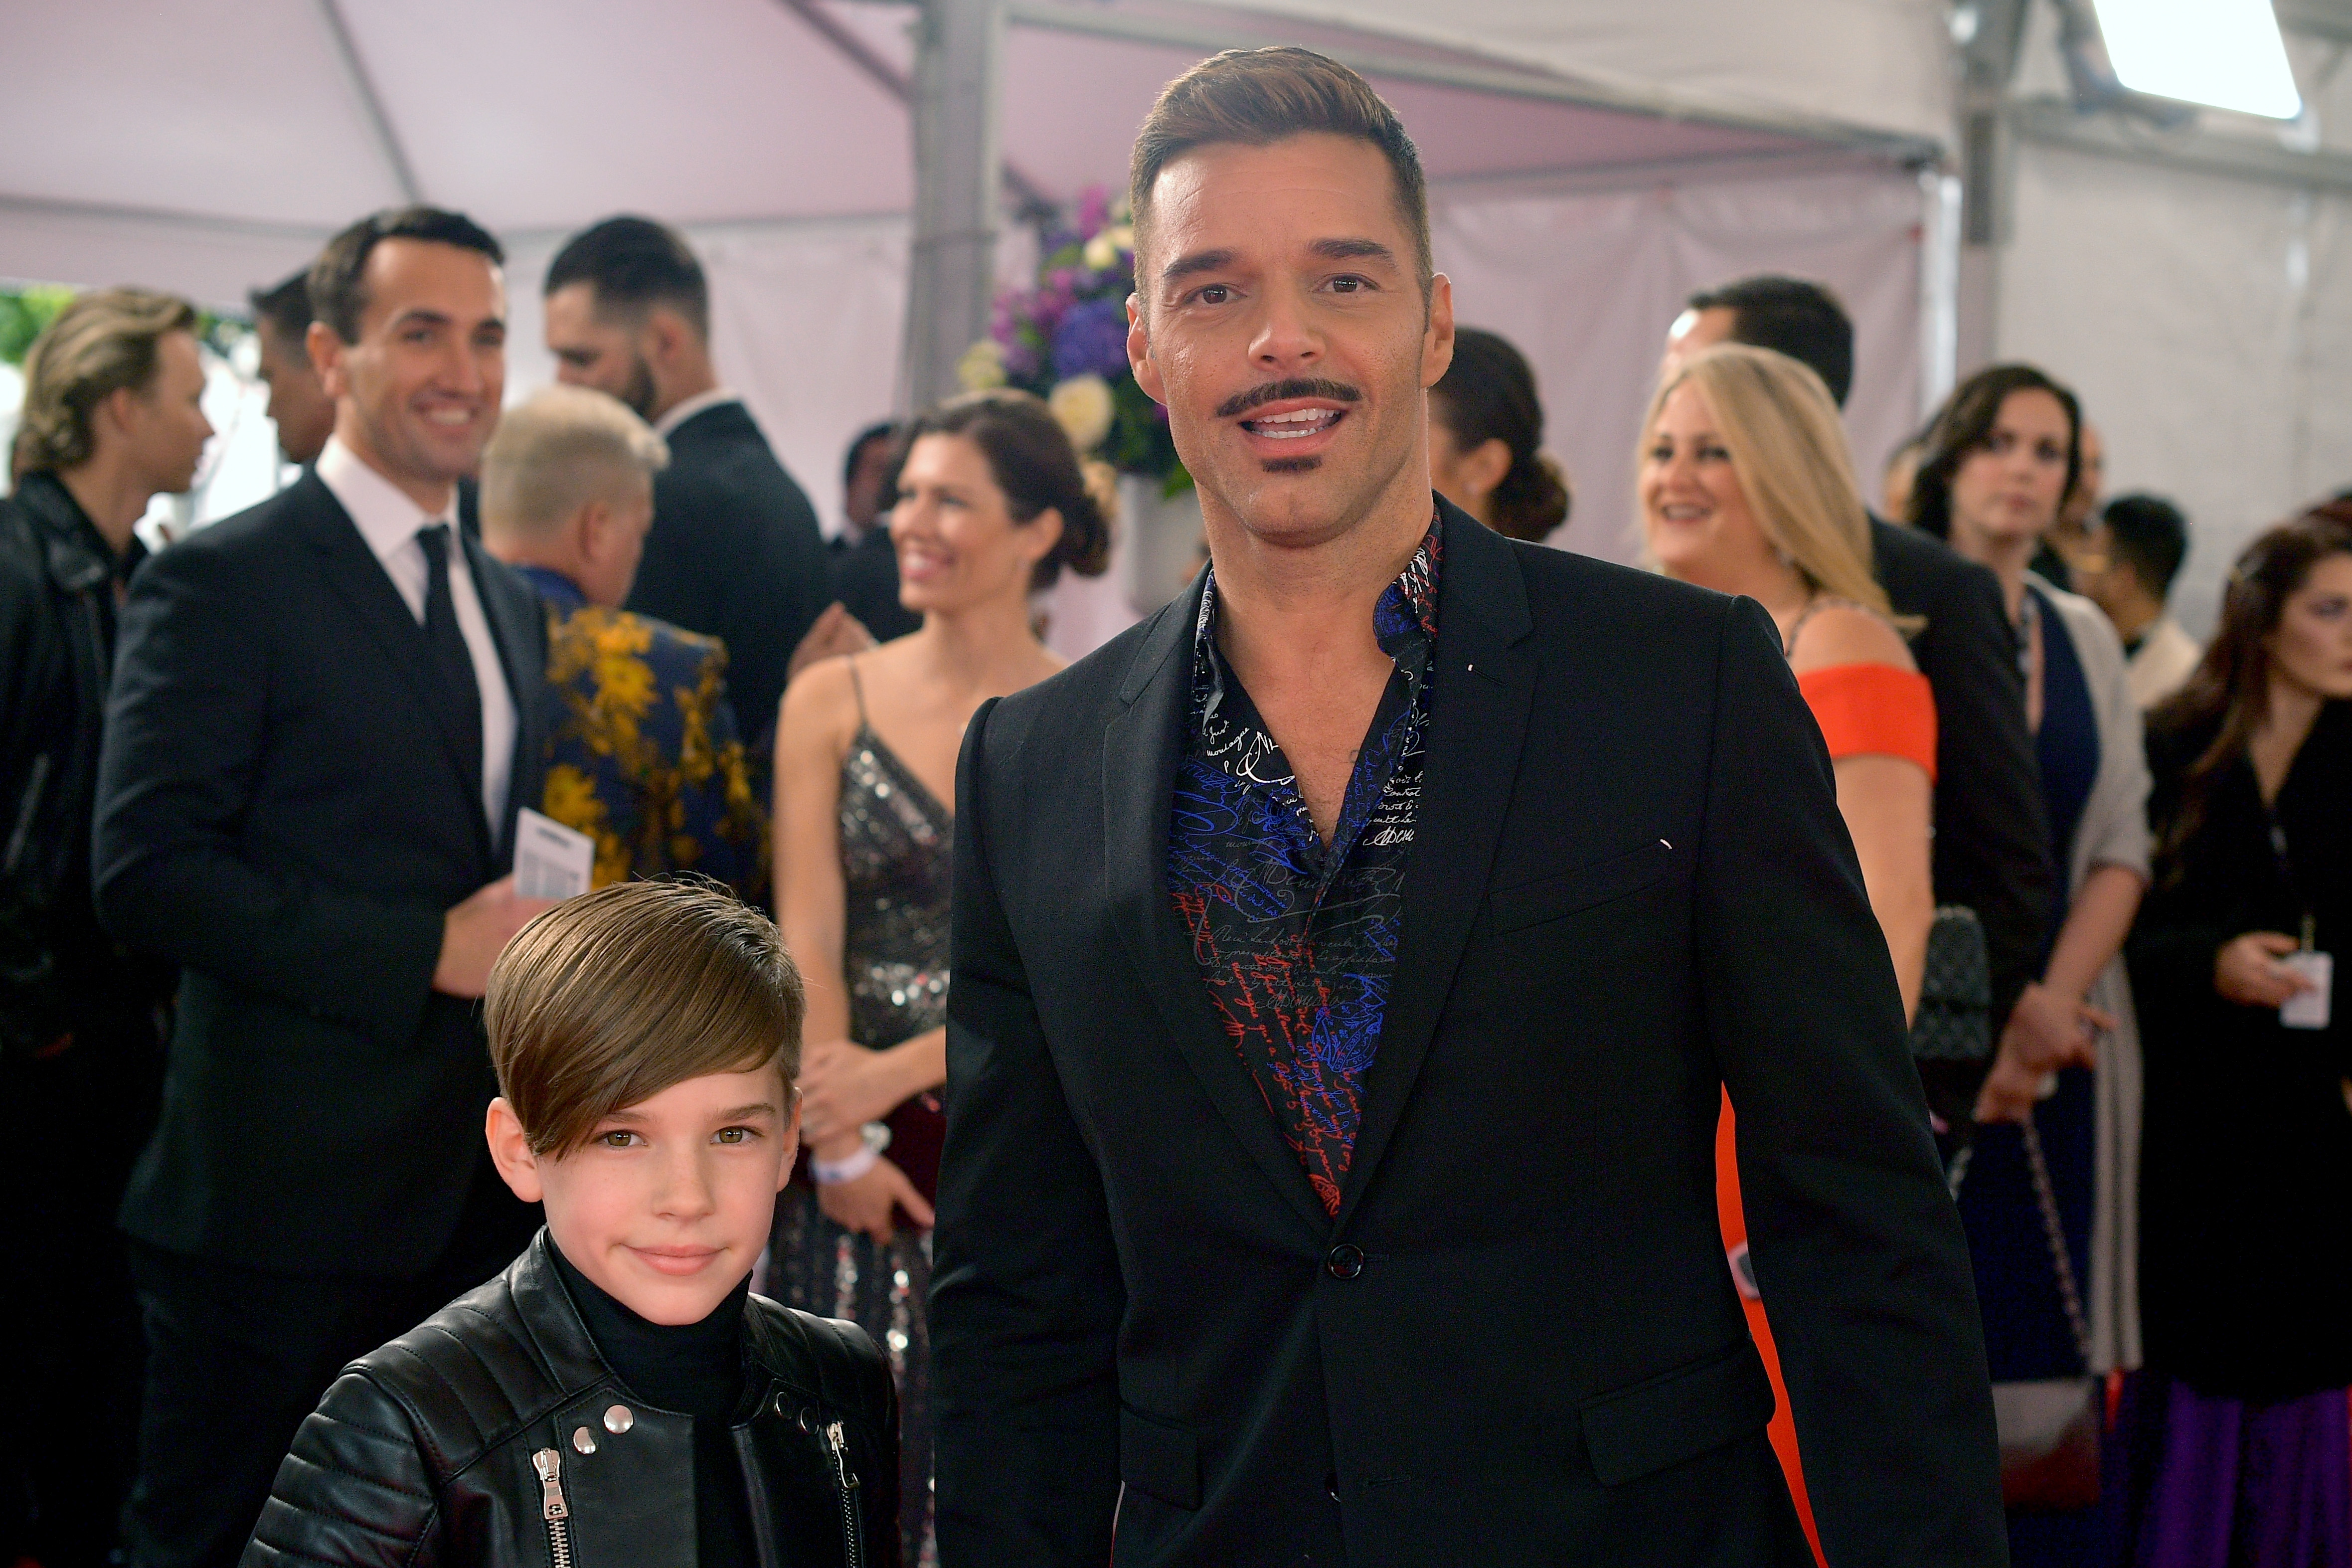 Ricky Martin's Son Matteo, 13, Joins Him on Set of His New Music Video